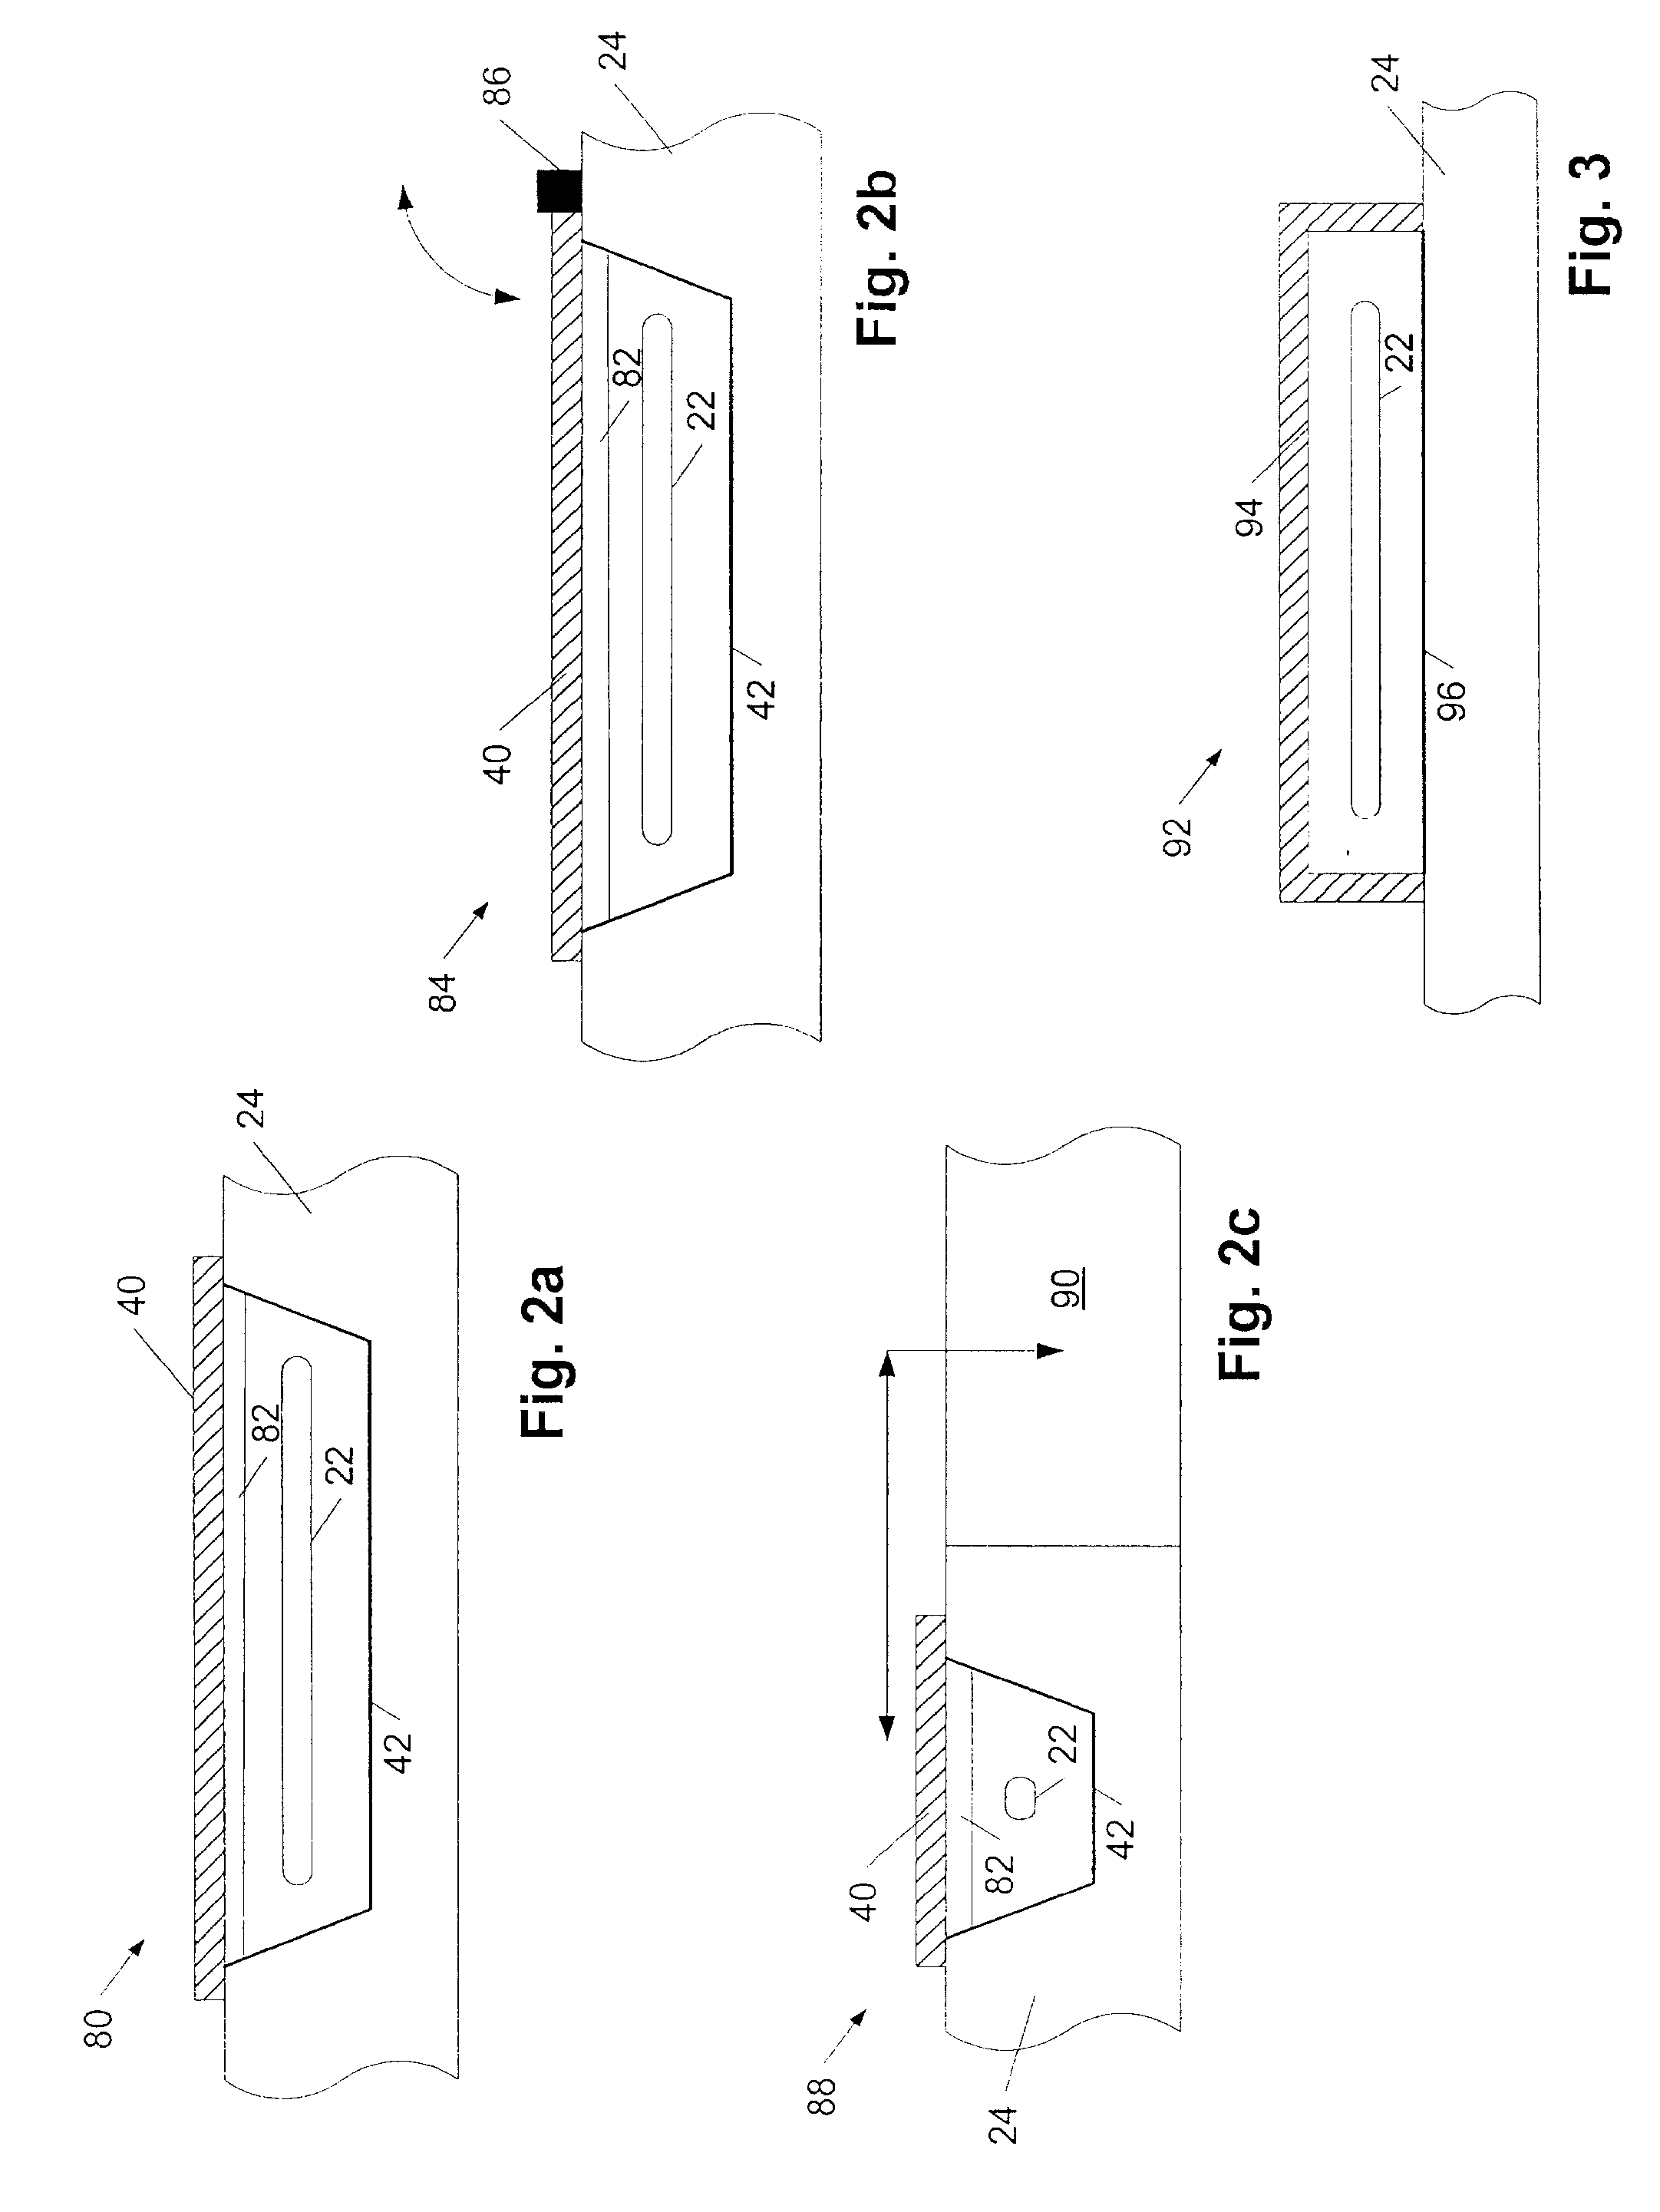 Ultraviolet Discharge Lamp Apparatuses with One or More Reflectors